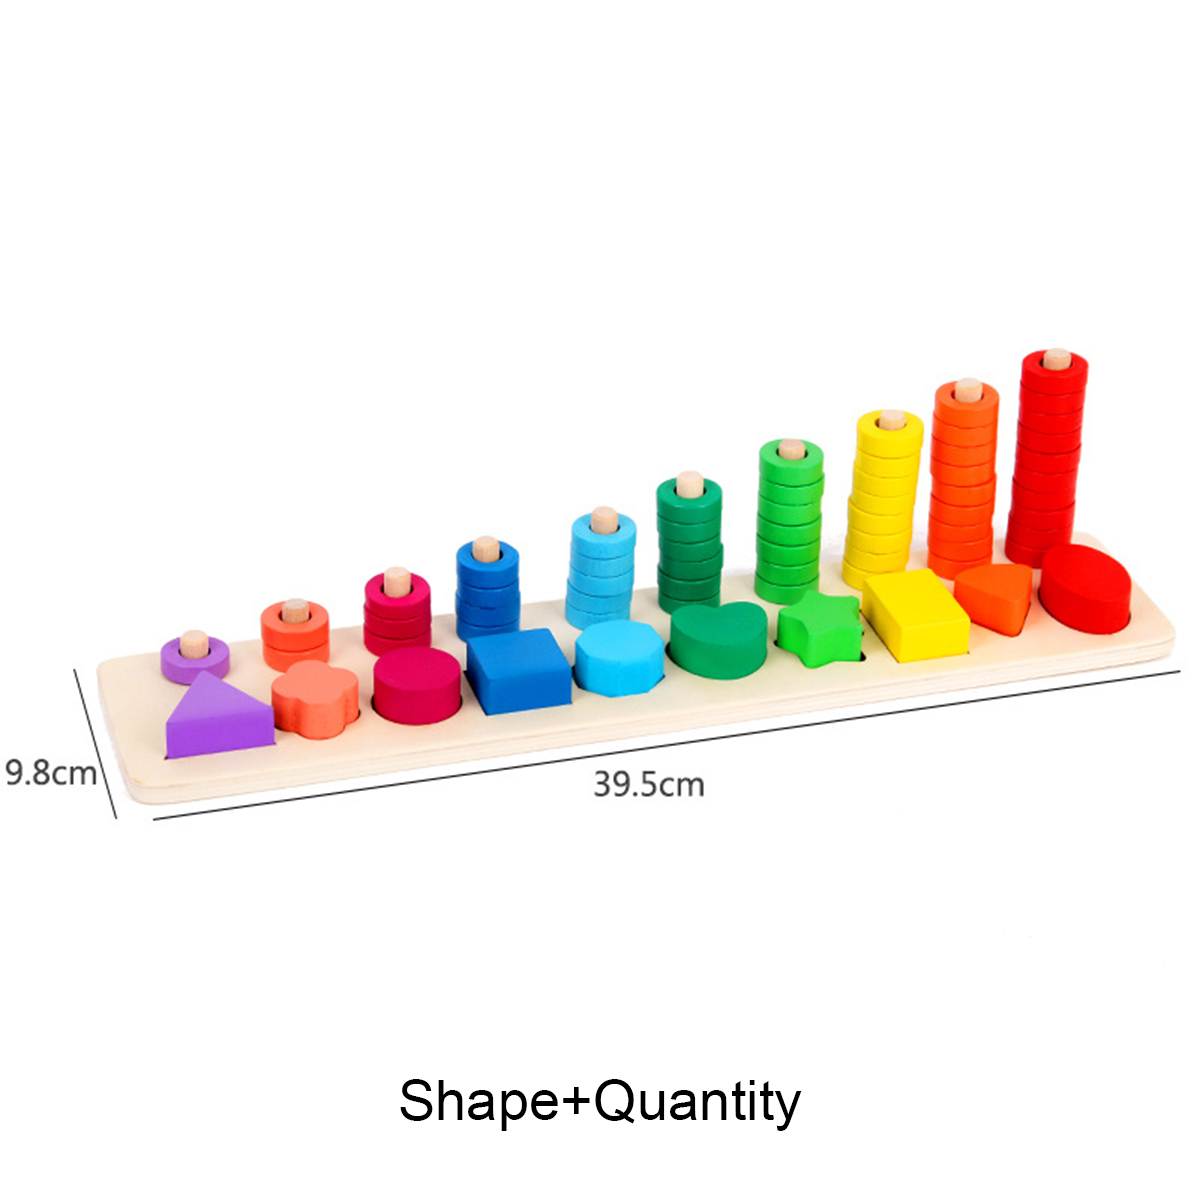 Children-Wooden-Montessori-Materials-Learning-To-Count-Numbers-Matching-Digital-Shape-Match-Early-Ed-1605437-7